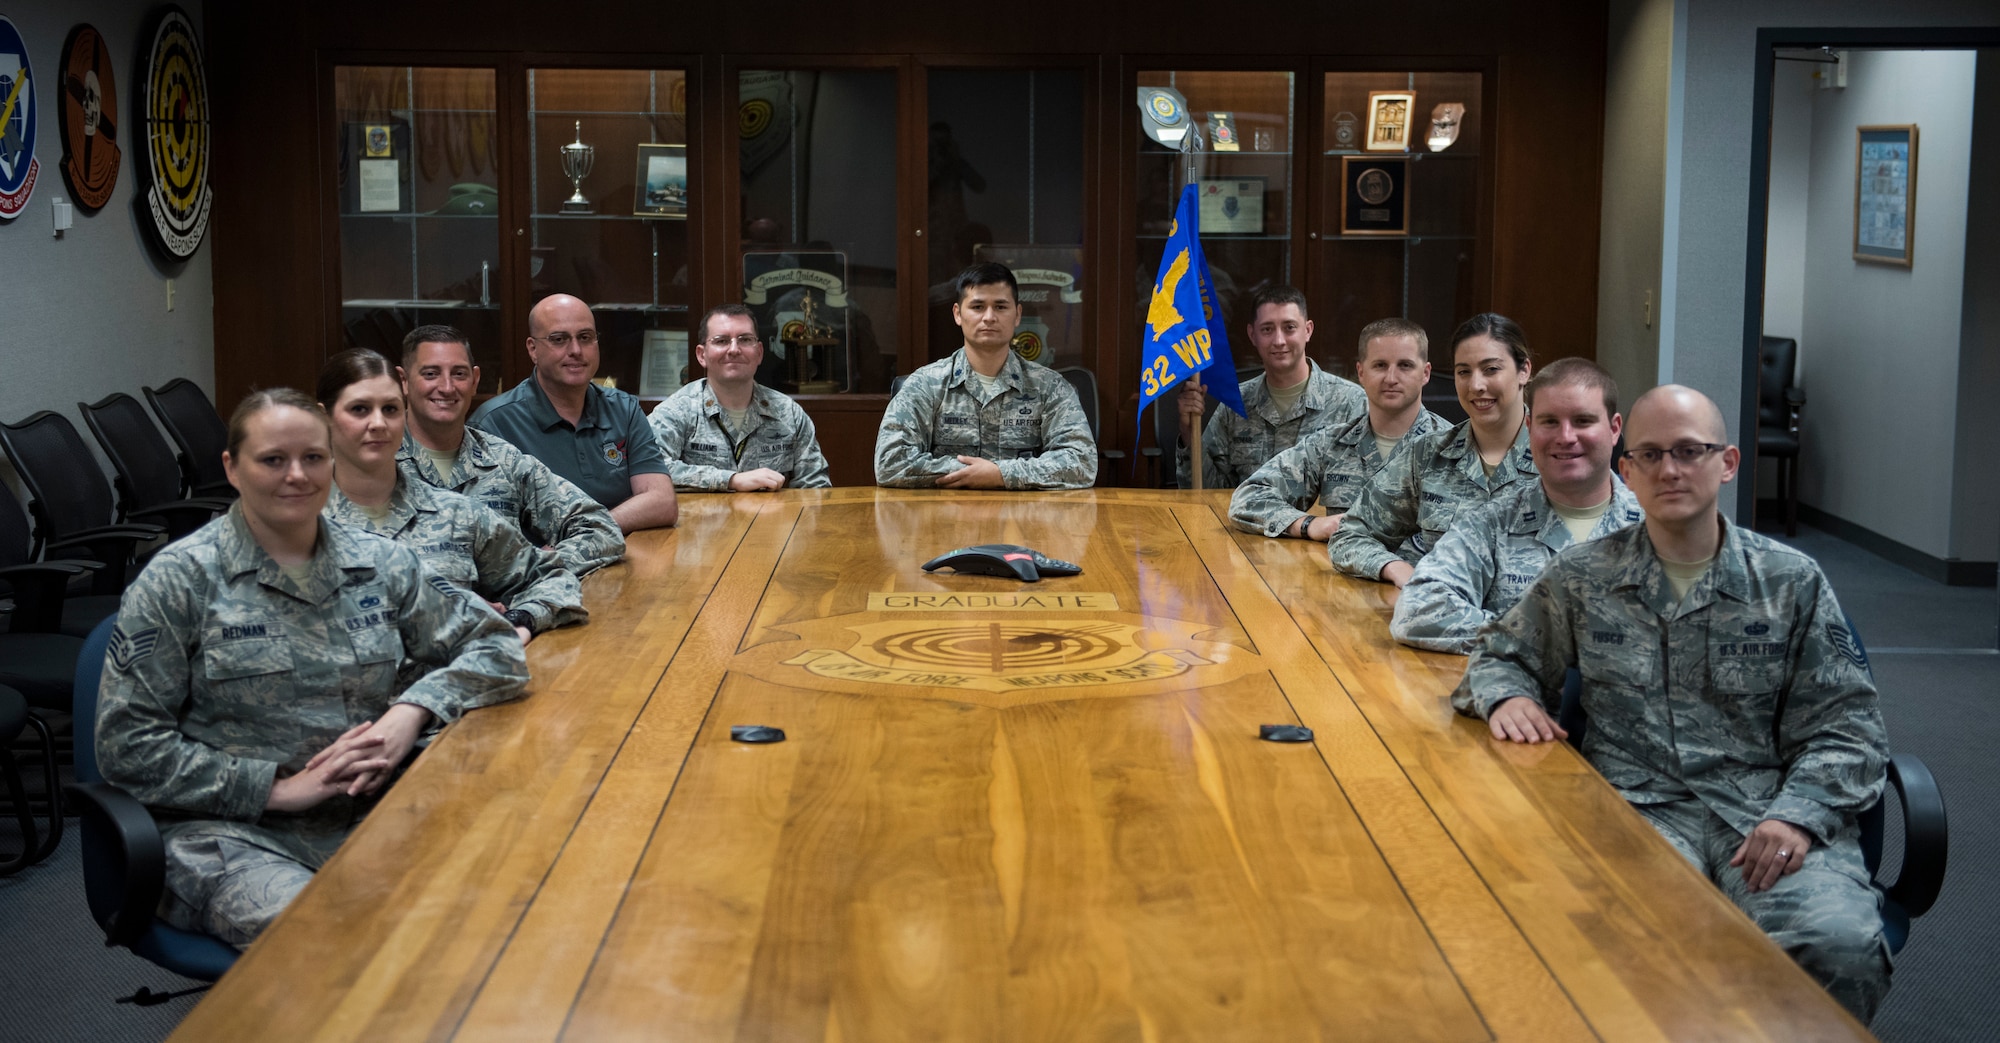 Members assigned to the 32nd Weapons Squadron gather around a table after an assumption of command ceremony at Nellis Air Force Base, Nevada, June 28, 2018. The 32nd WPS is the newest squadron in the U.S. Air Force Weapons School. (U.S. Air Force photo by Airman 1st Class Andrew D. Sarver)